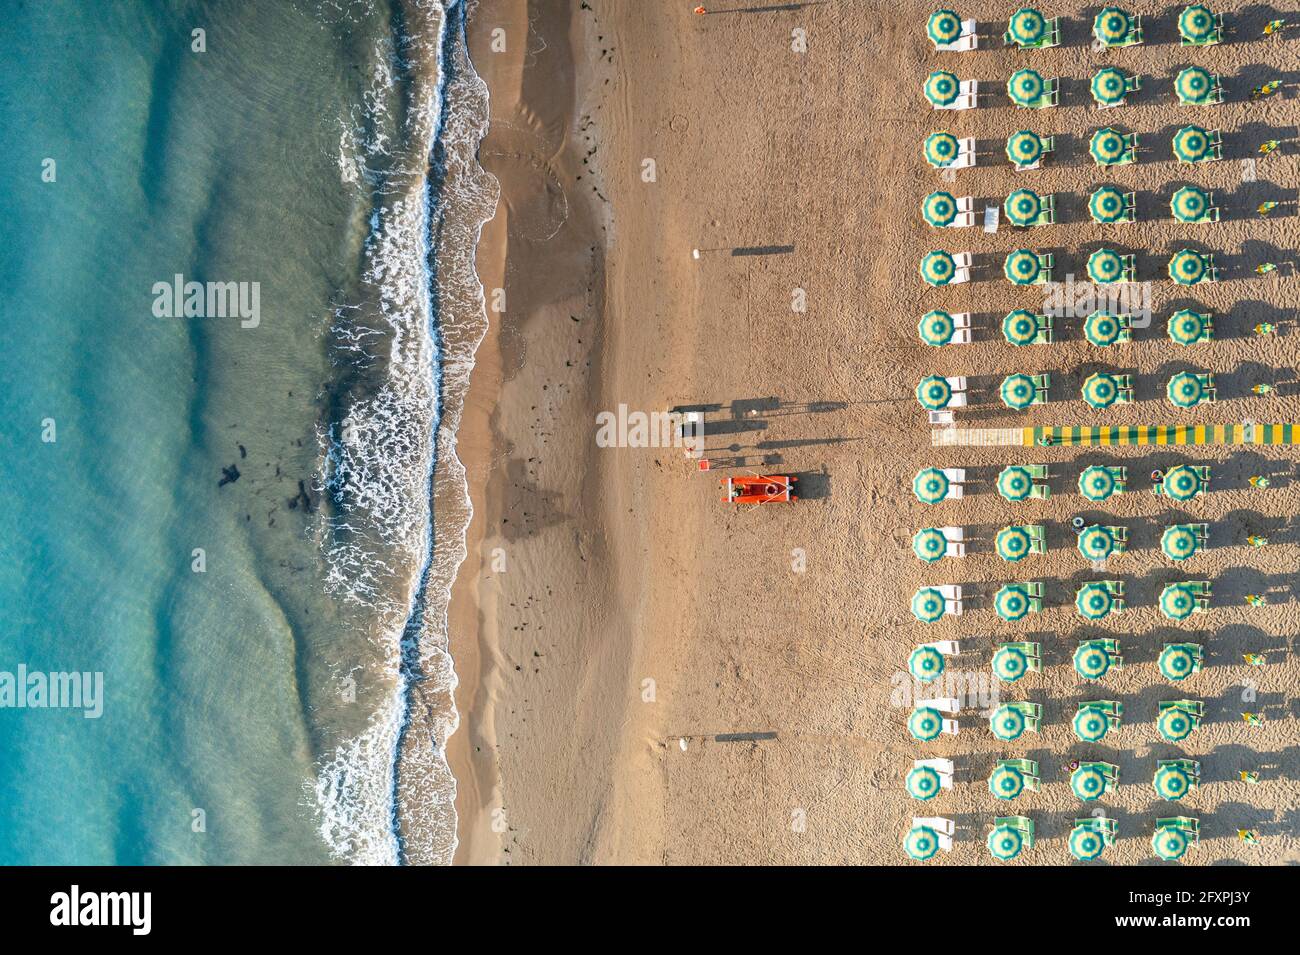 Aerial view of beach umbrellas and sunbeds in tidy rows during summer, Vieste, Foggia province, Gargano, Apulia, Italy, Europe Stock Photo